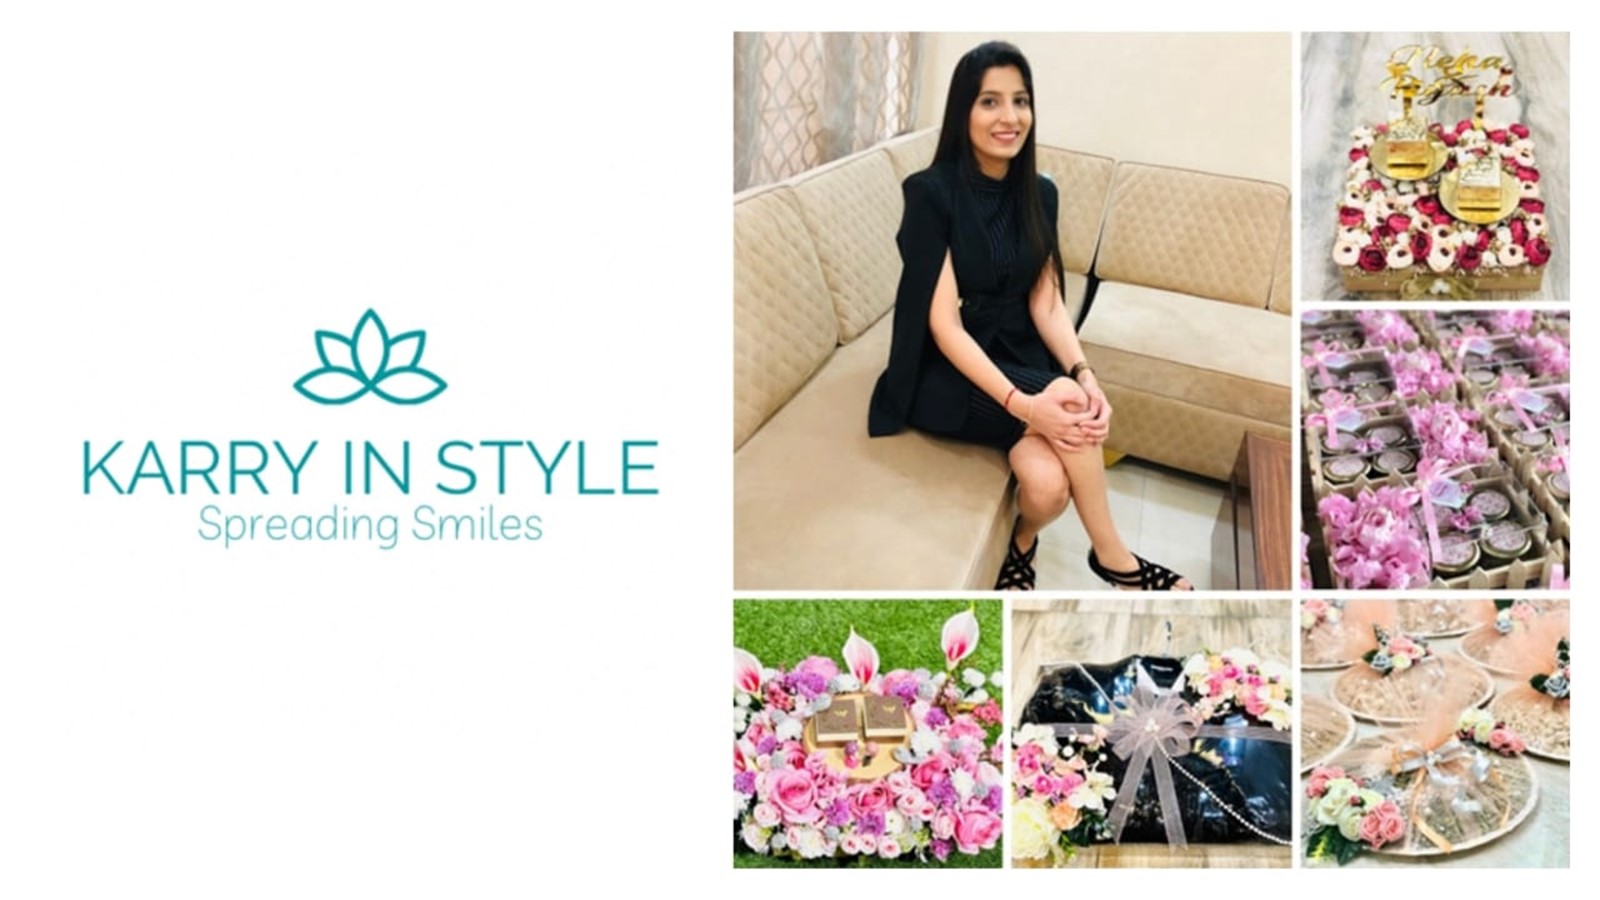 Delightful Festive Gifting: An Interview with Priya Katariya, Founder of Karry in Style